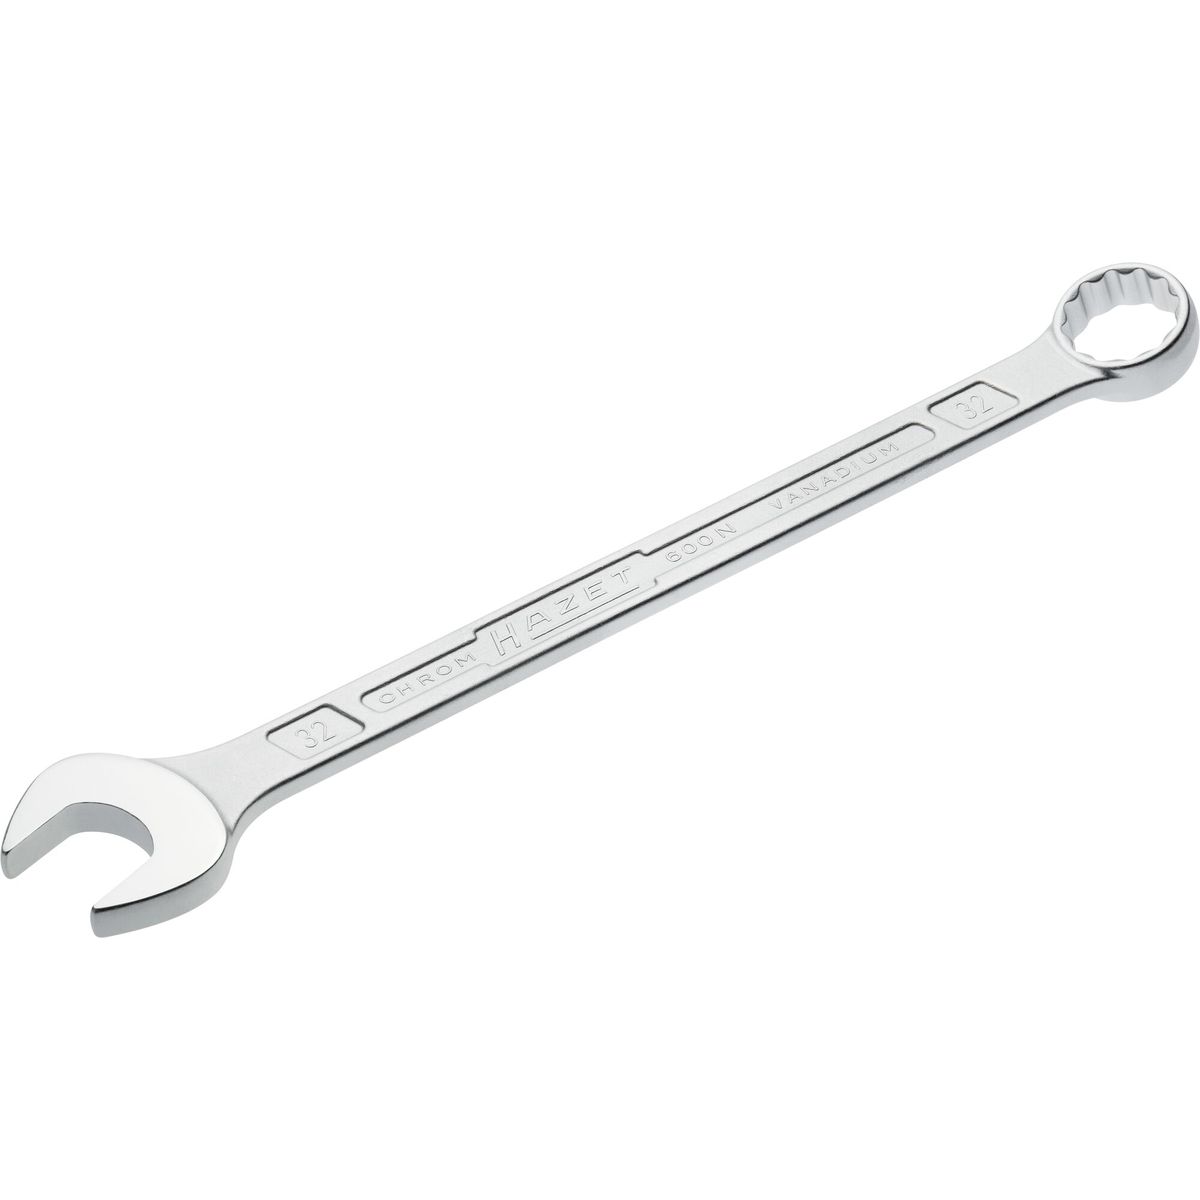 Combination Wrench No.600N-32 Hazet®